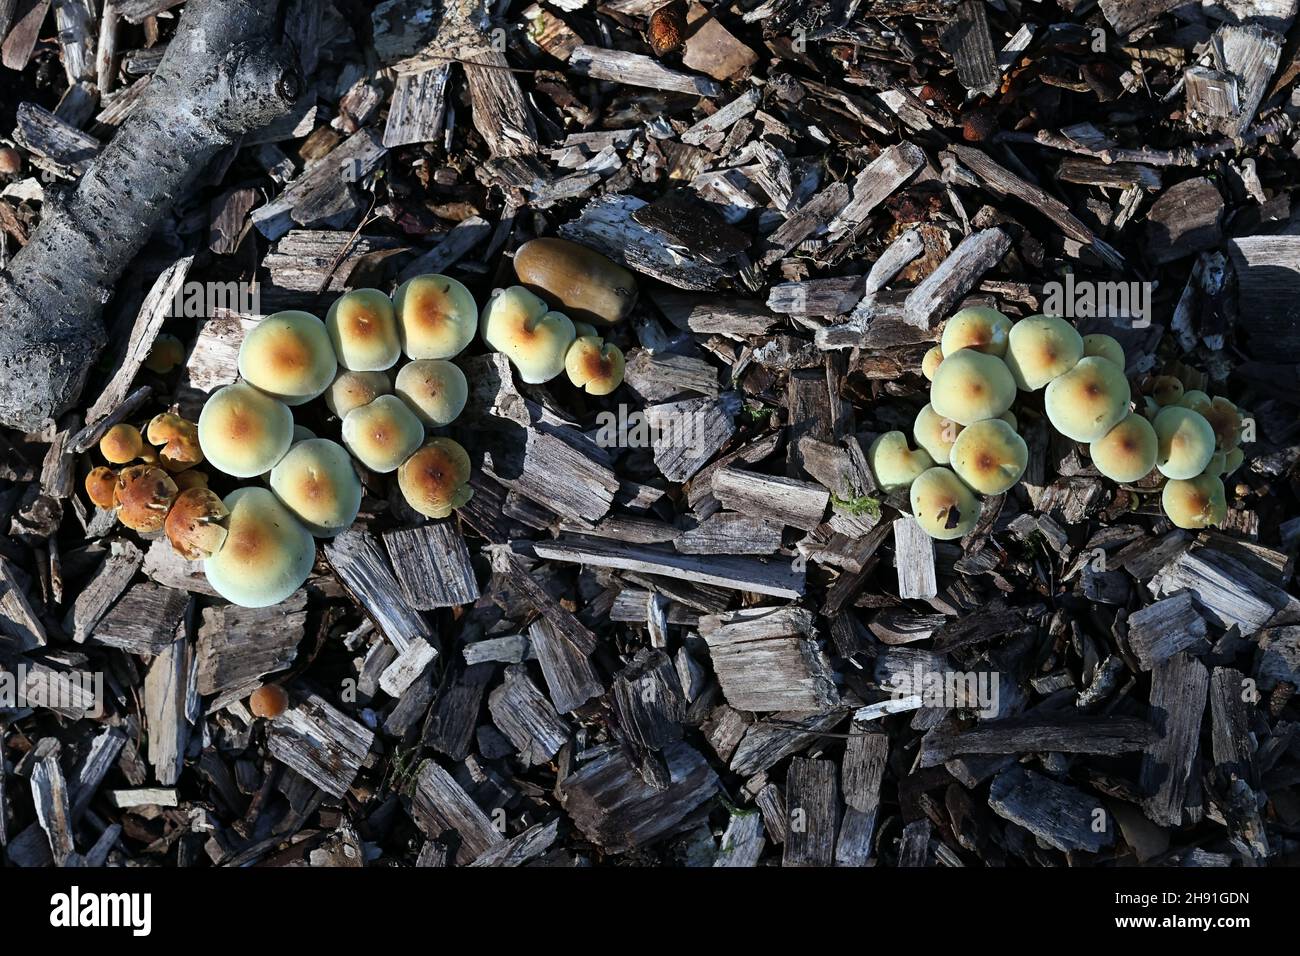 Hypholoma fasciculare, known as sulphur tuft, sulfur tuft or clustered woodlover, wild mushroom from Finland Stock Photo